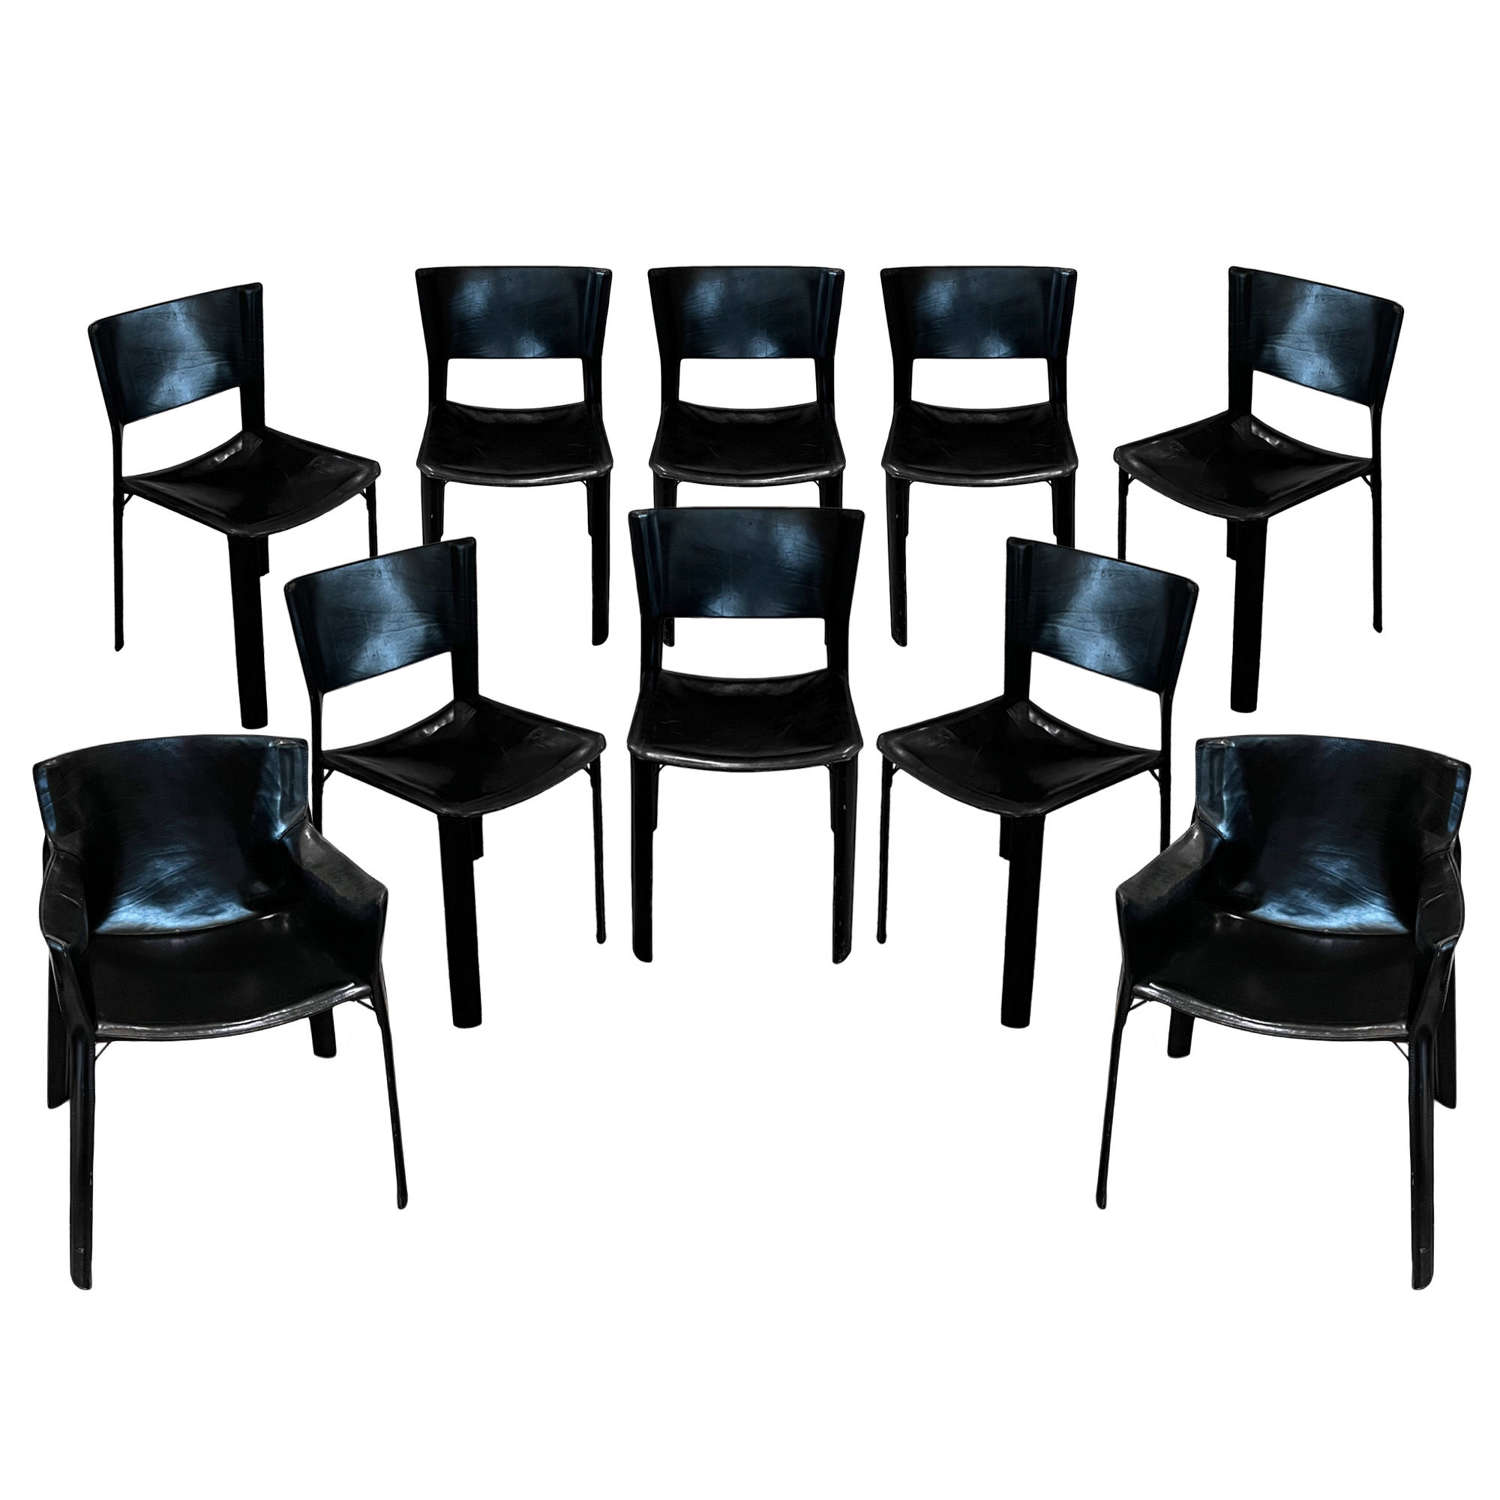 Set of 10 1970s Black Leather and Steel Chairs Attrib to Mario Bellini